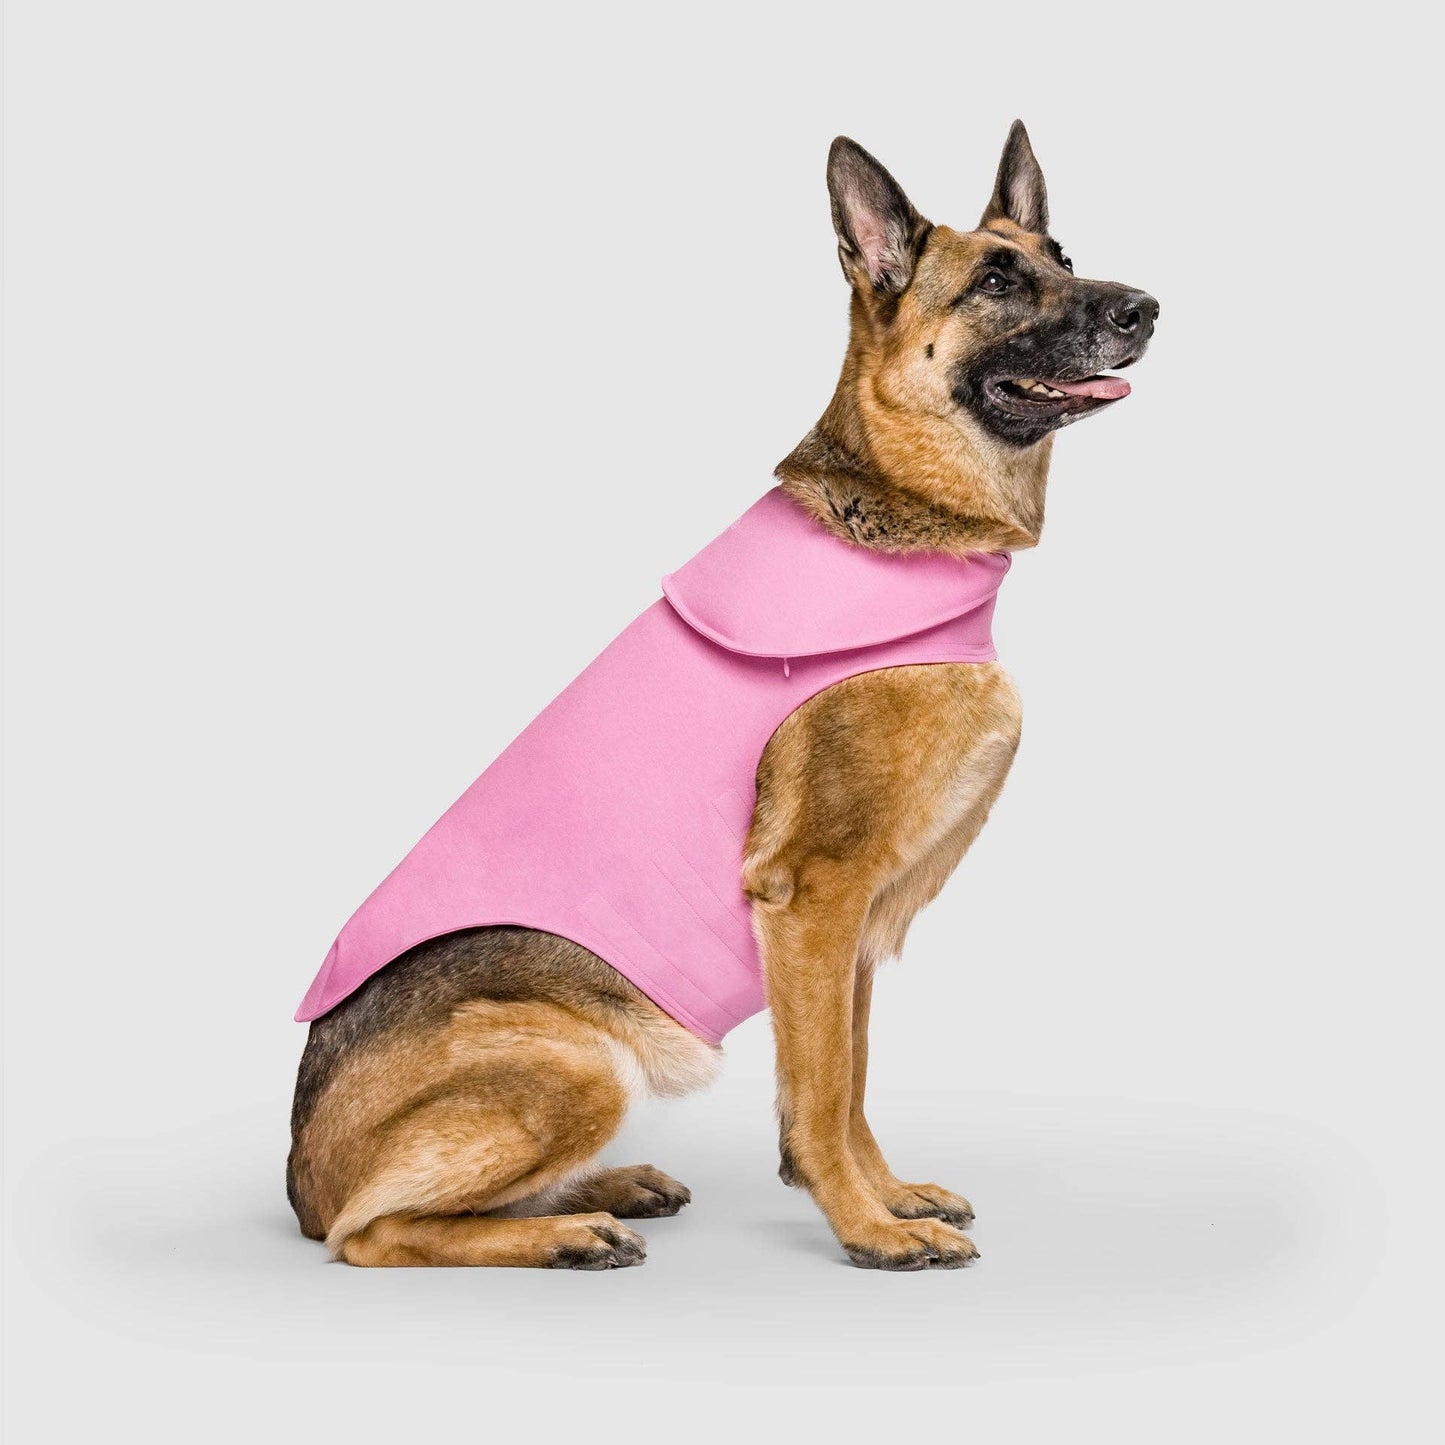 Weighted Calming Dog Vest